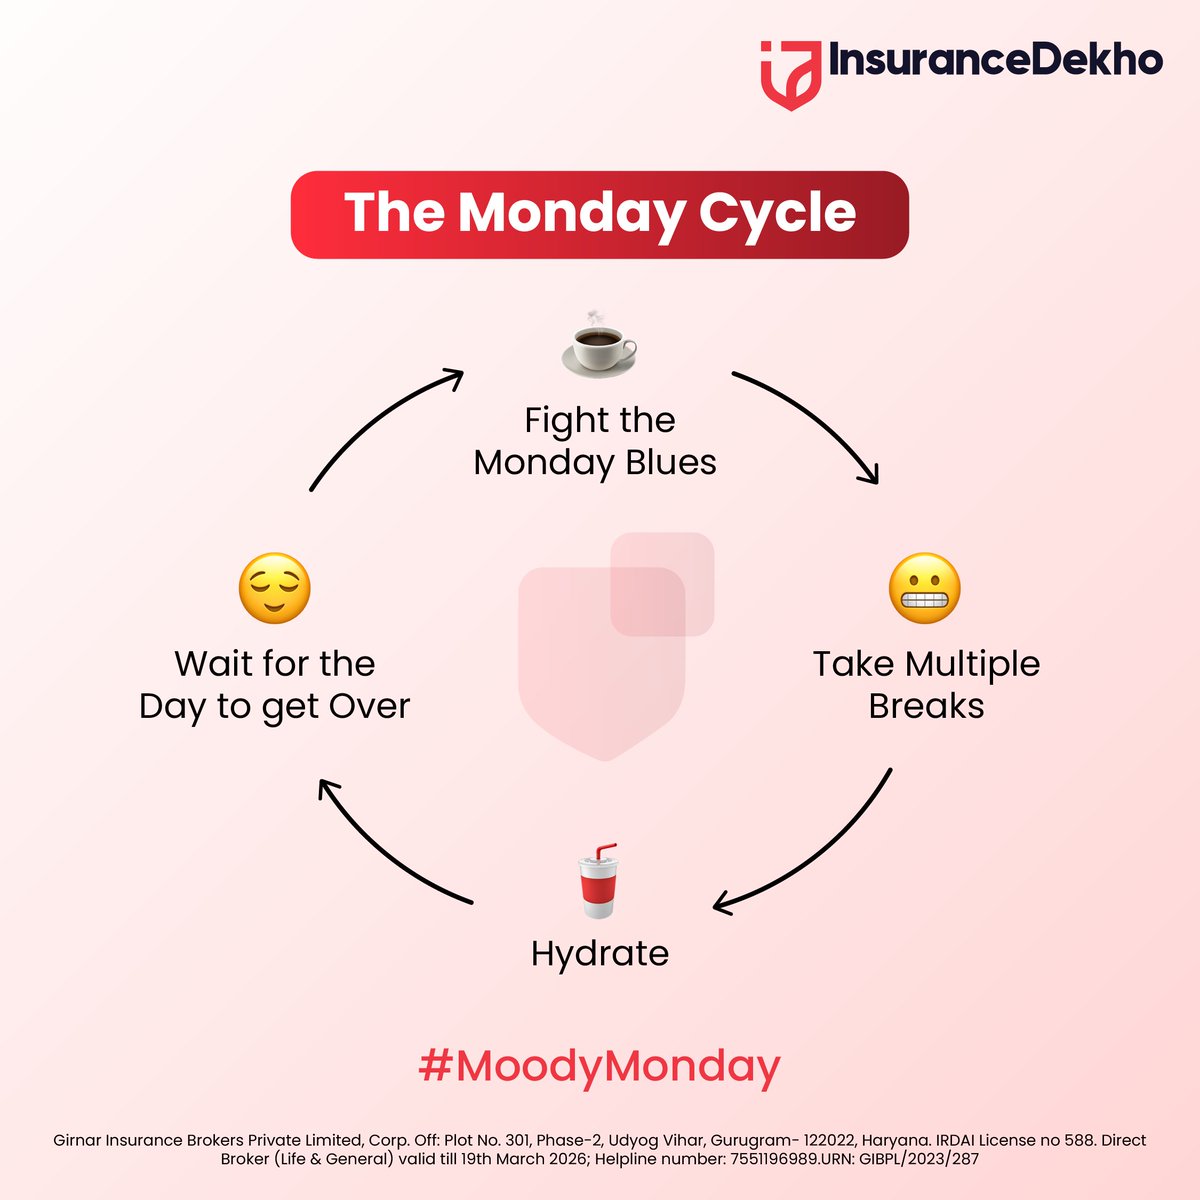 It’s not Monday if you’re not waiting for the day to end. 🗓️

#MondayMotivation #InsuranceDekho #Monday #Insuranceplans #Lifeinsurance #MoodyMonday #Mondaycycle #Healthsurance #Insurance